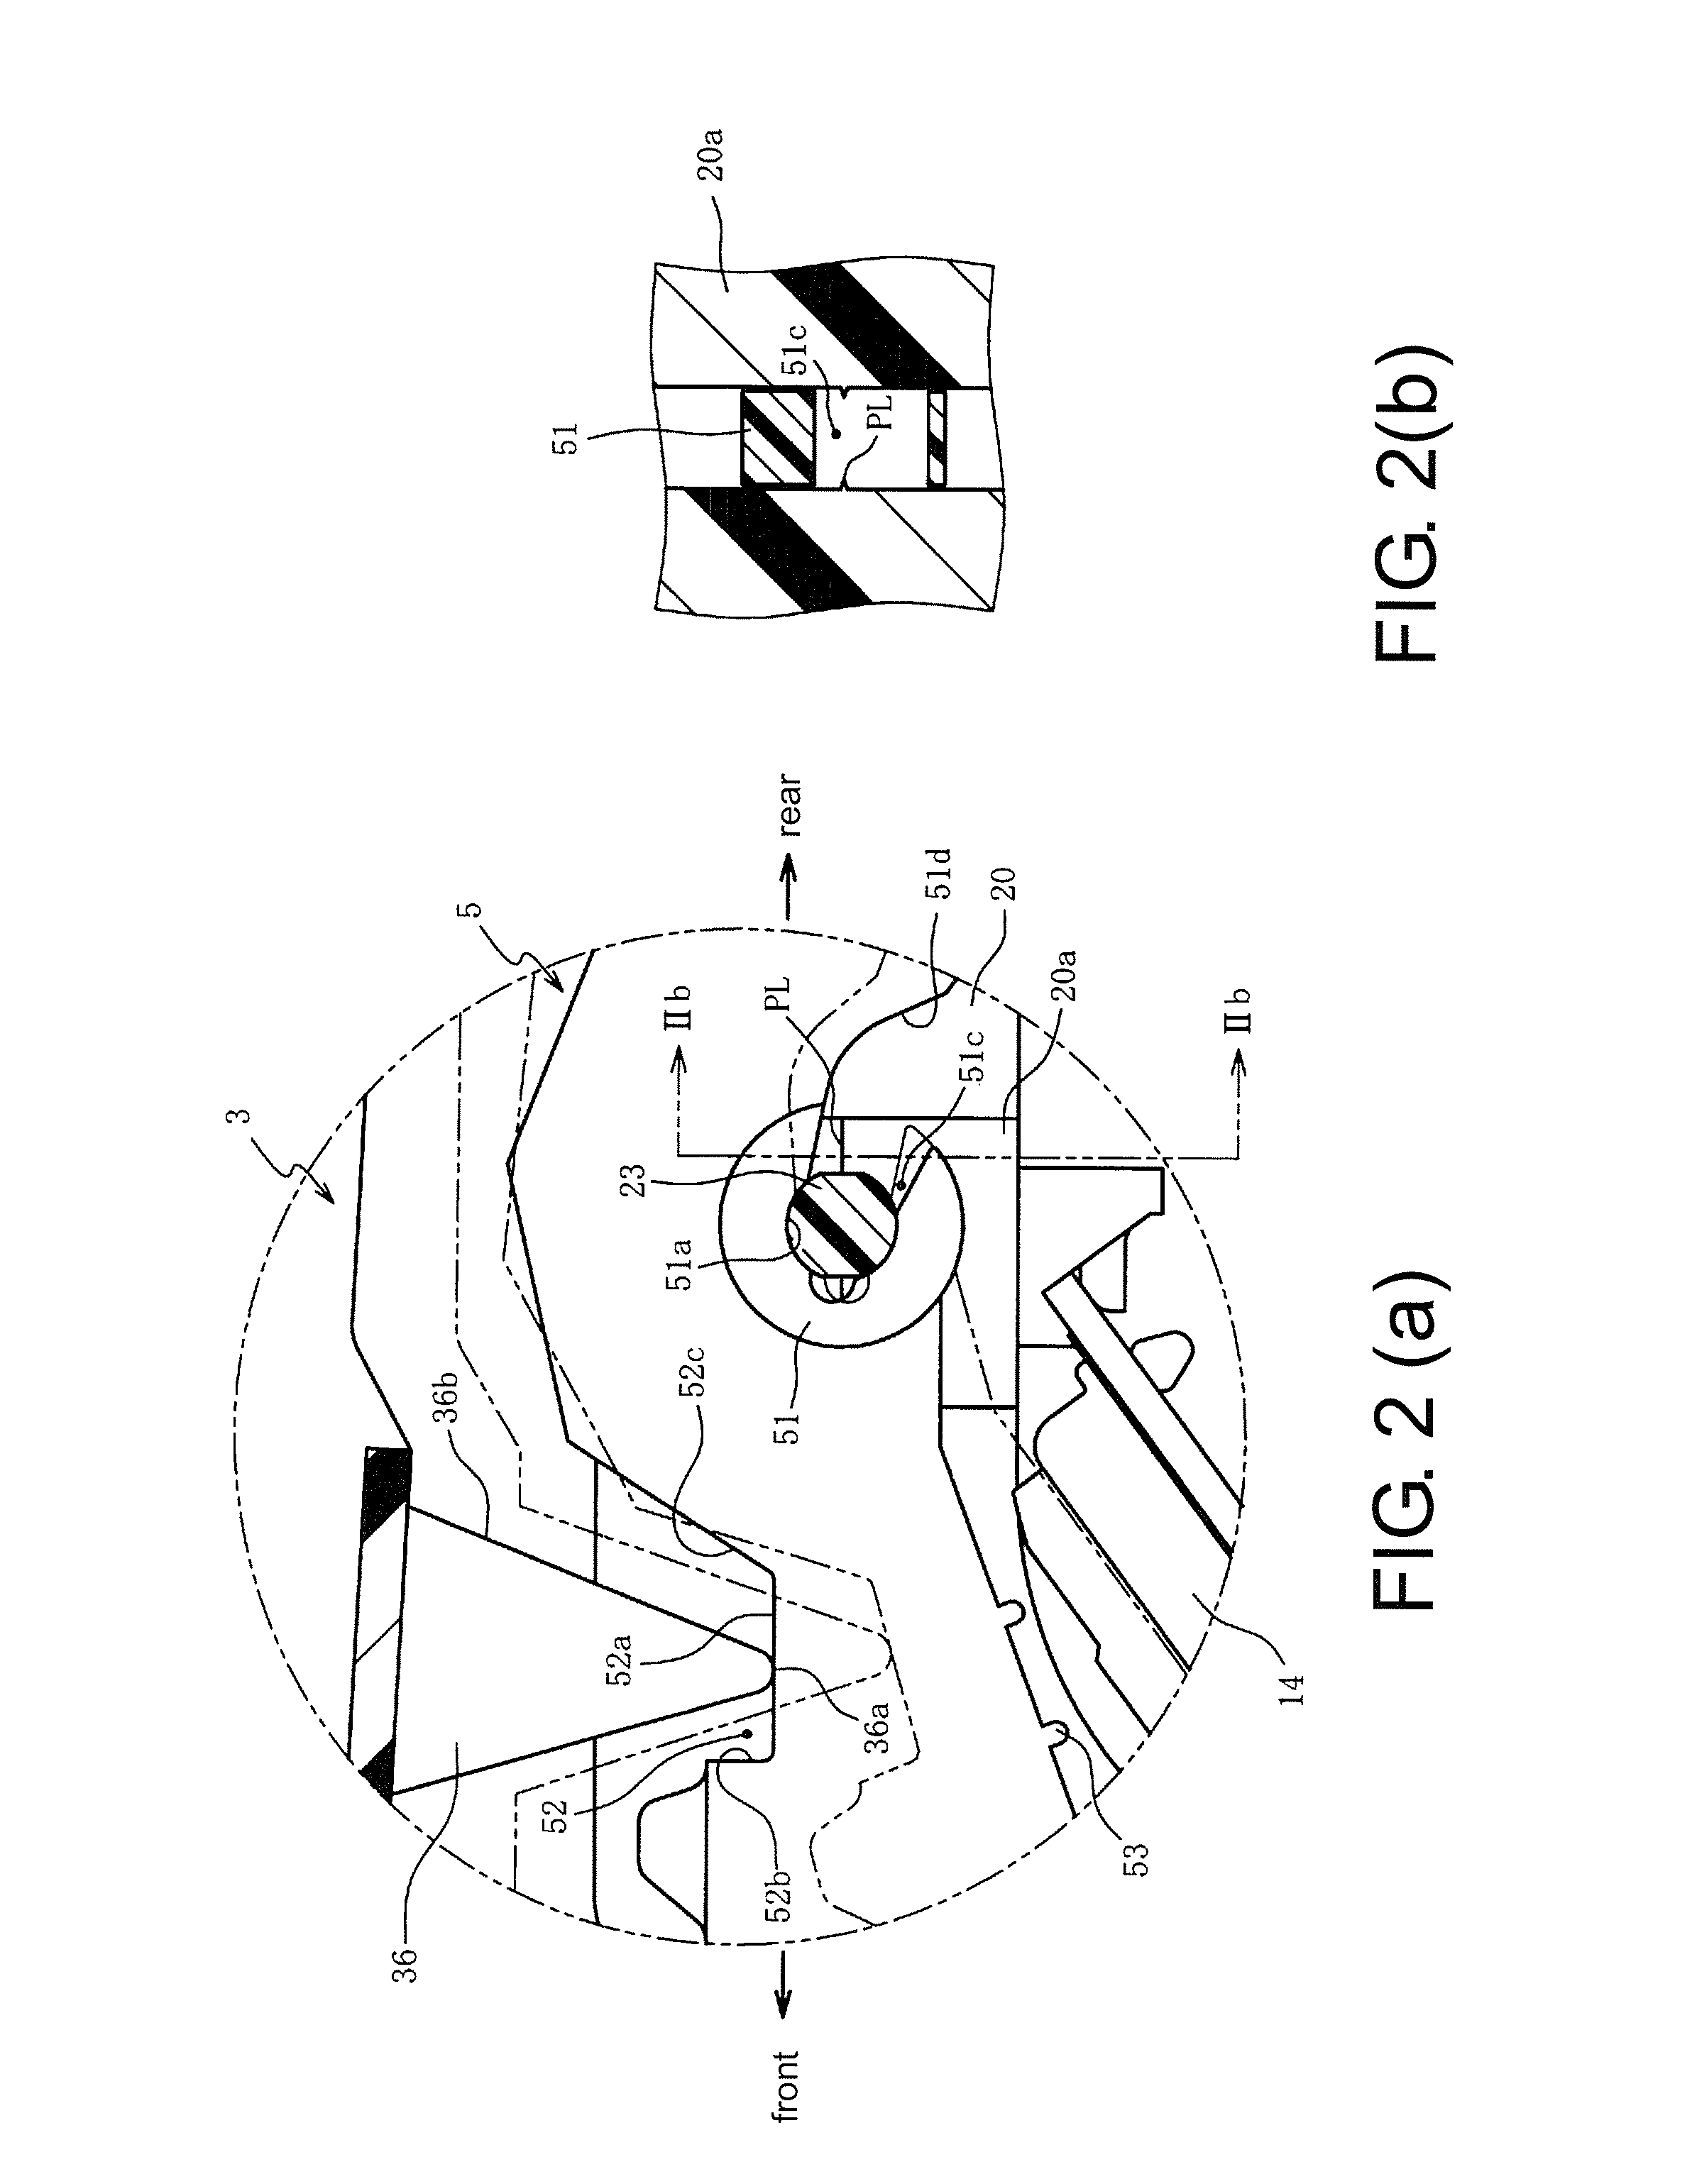 Keyboard device of electronic musical instrument